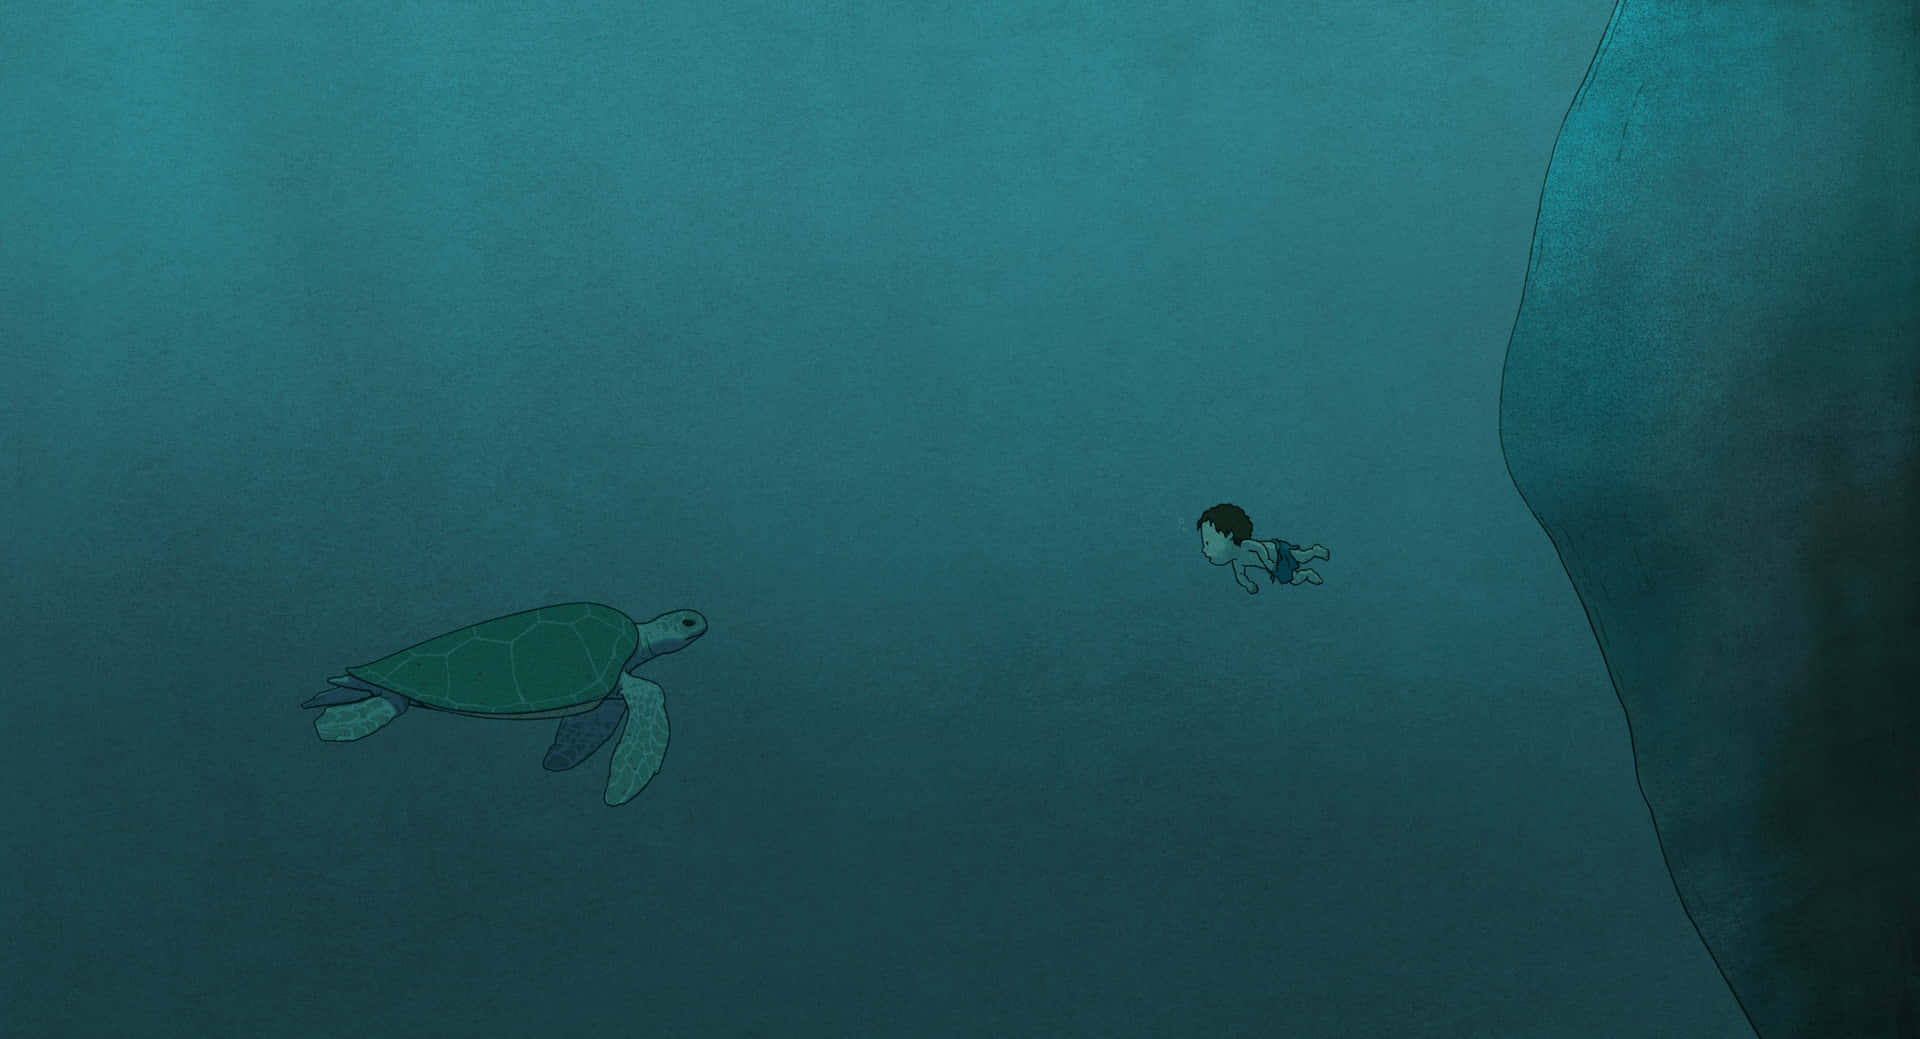 A magical encounter on the deserted shore in The Red Turtle Wallpaper